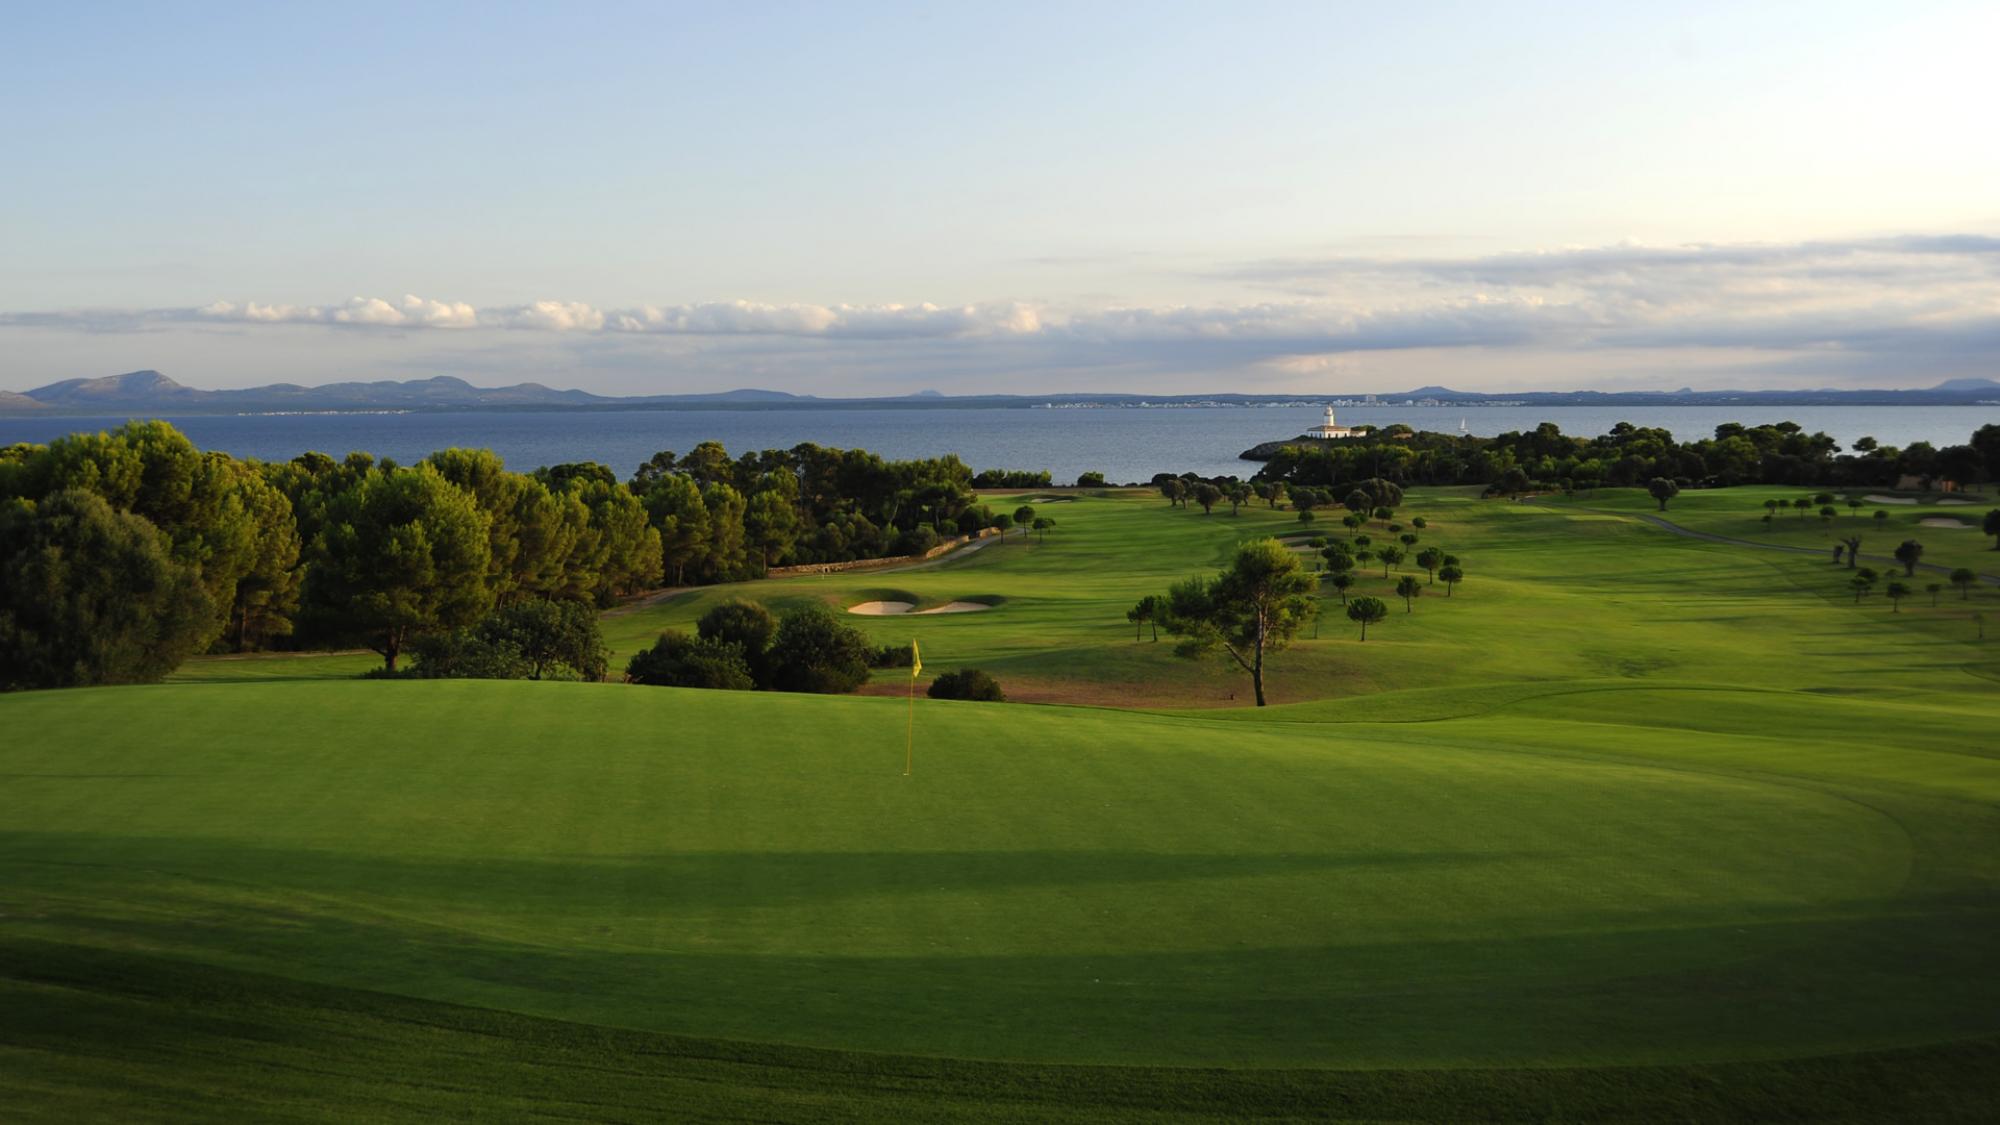 The Andratx Golf Course - Camp de Mar's beautiful golf course situated in spectacular Mallorca.